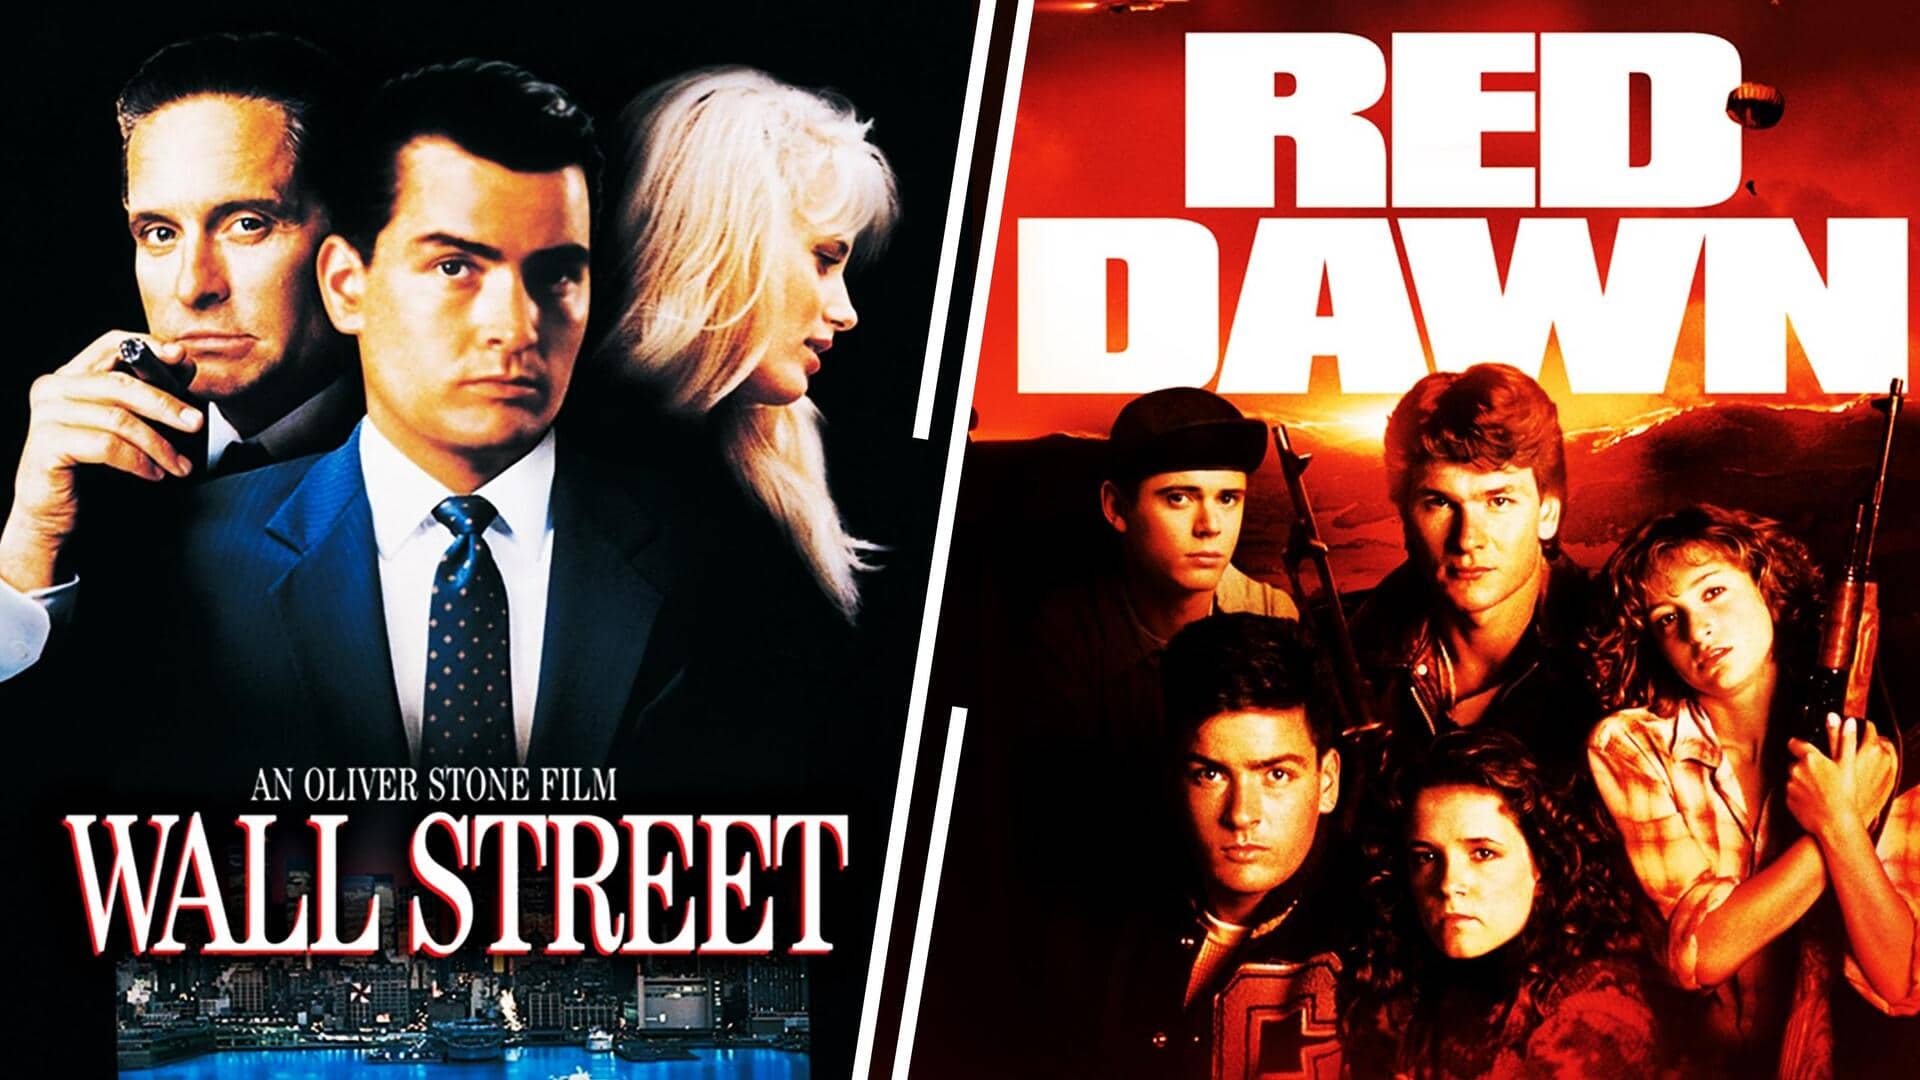 'Red Dawn' to 'Hot Shots!': Charlie Sheen's best projects